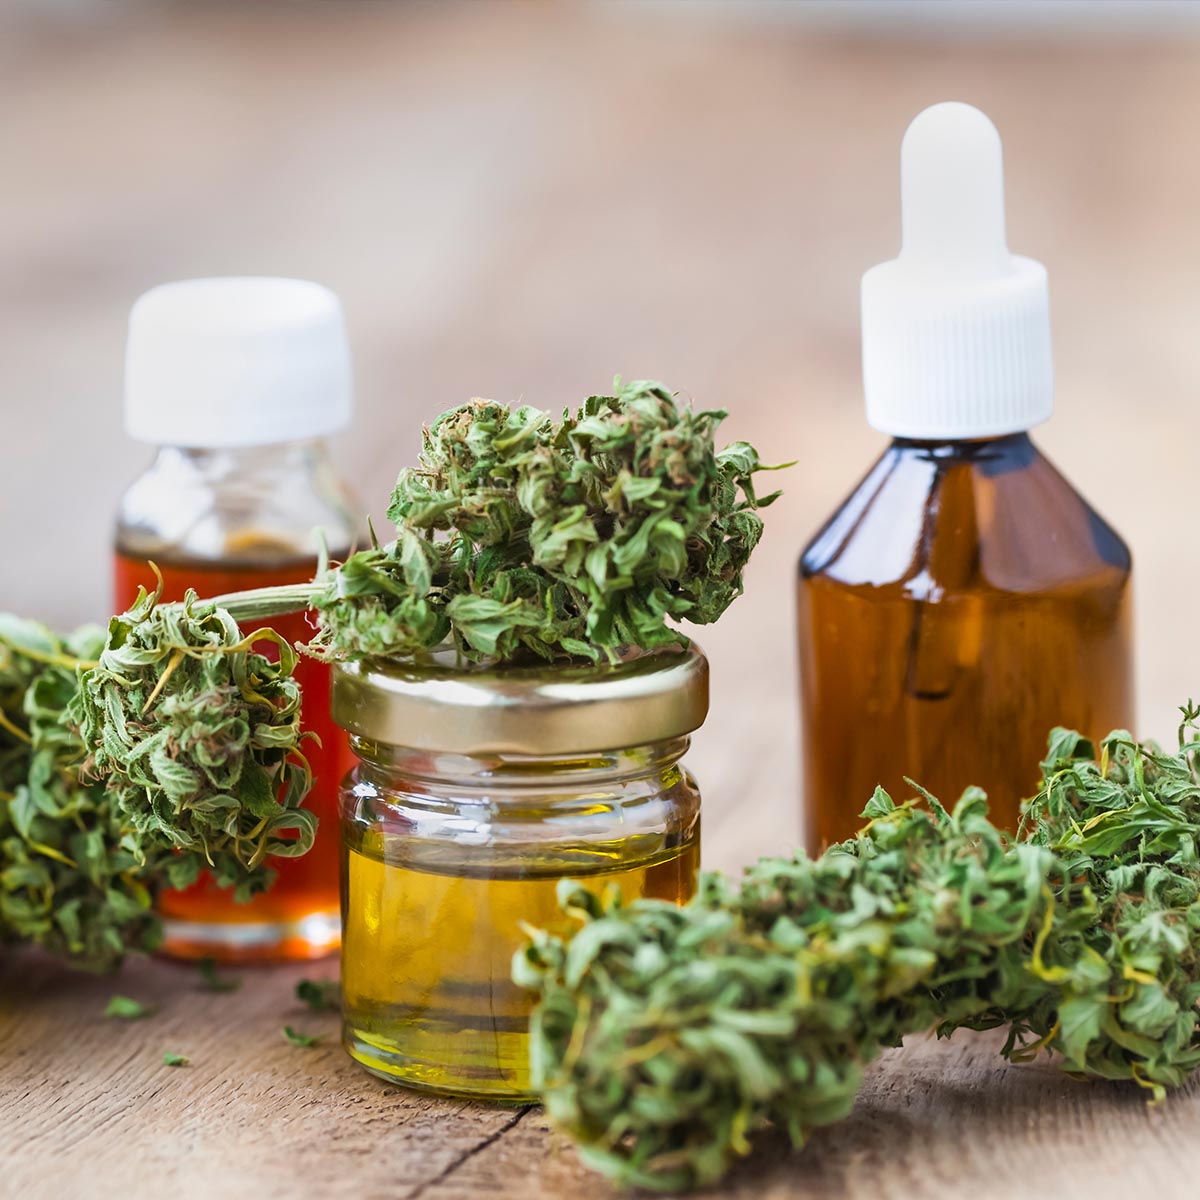 How Does CBD Oil Affect the Body?